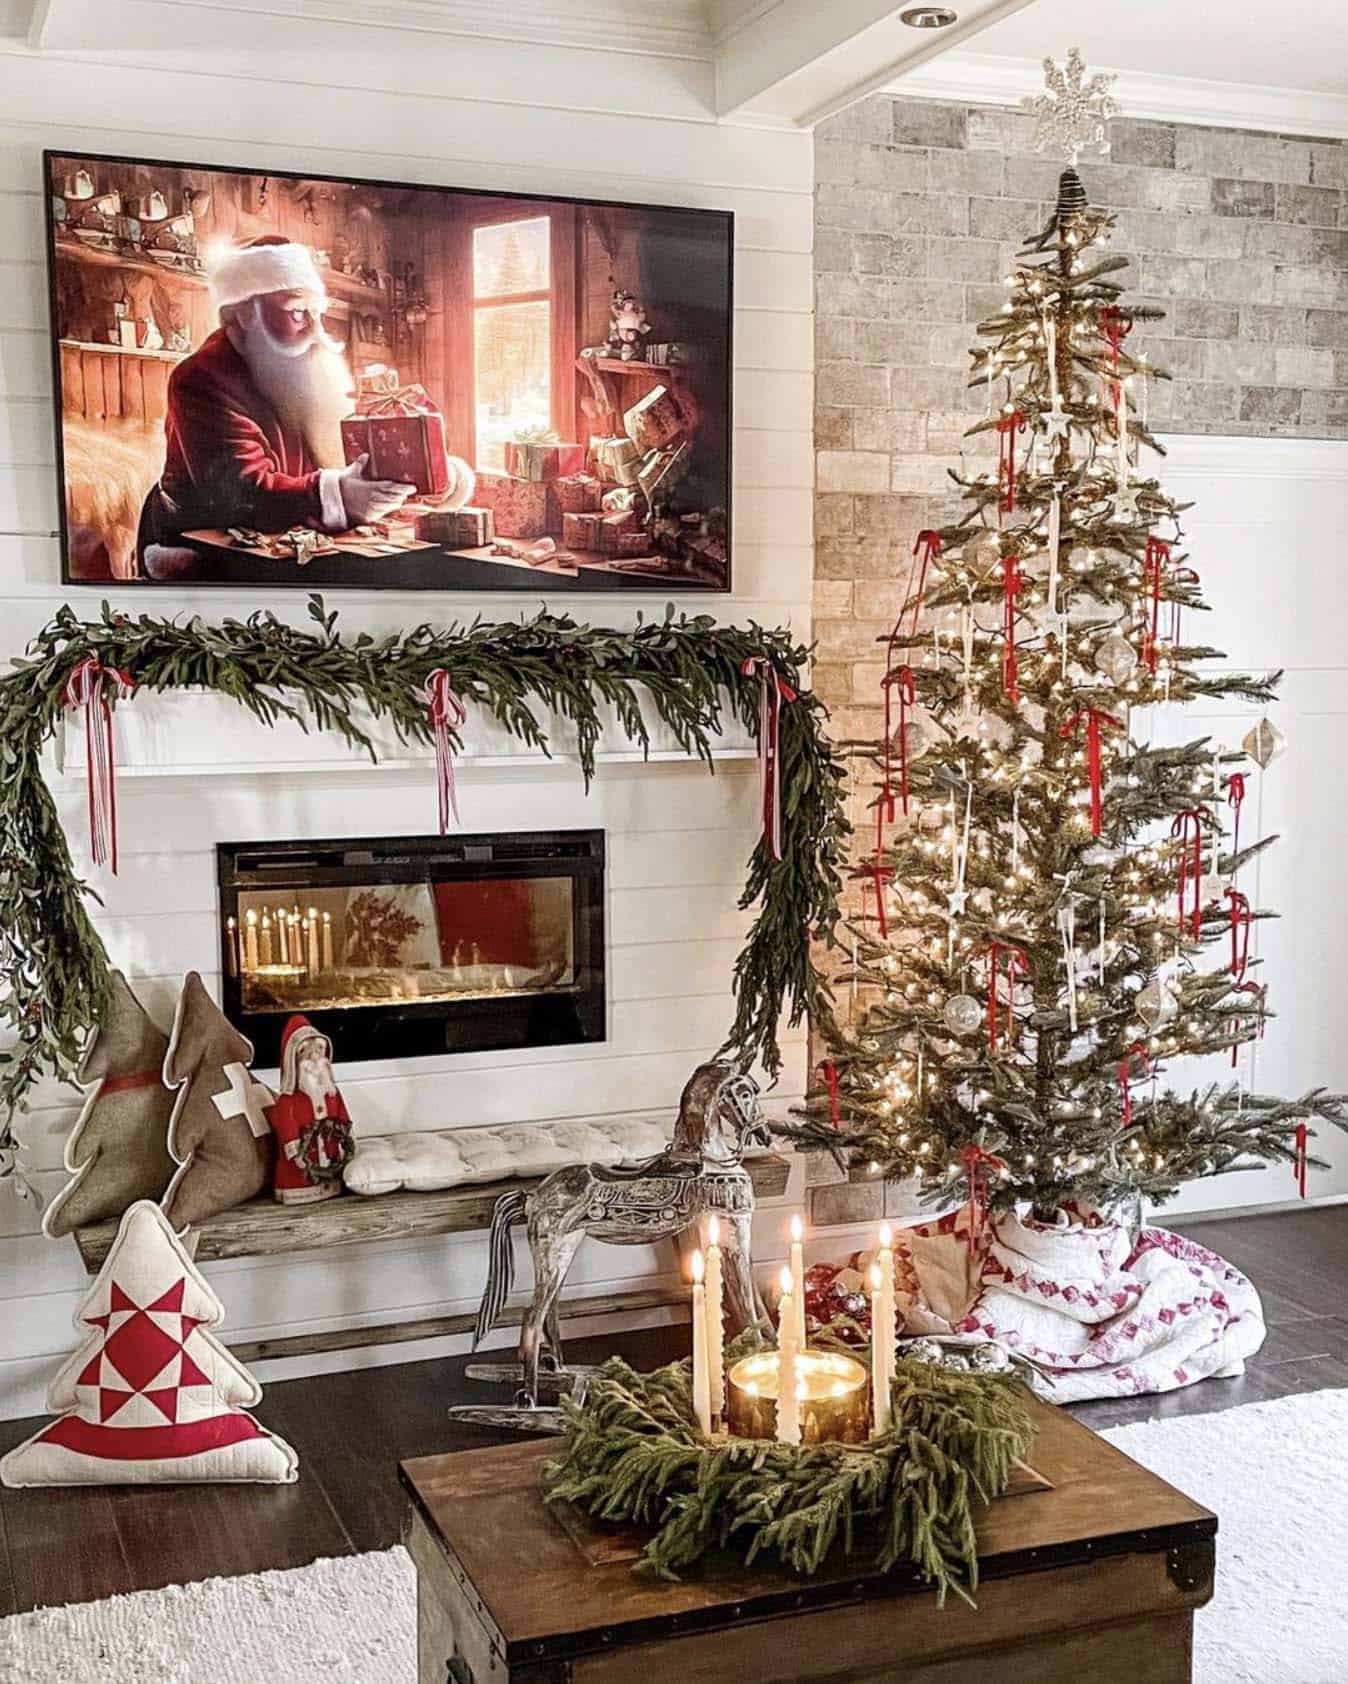 living room fireplace mantel decorated with garland and a Christmas tree